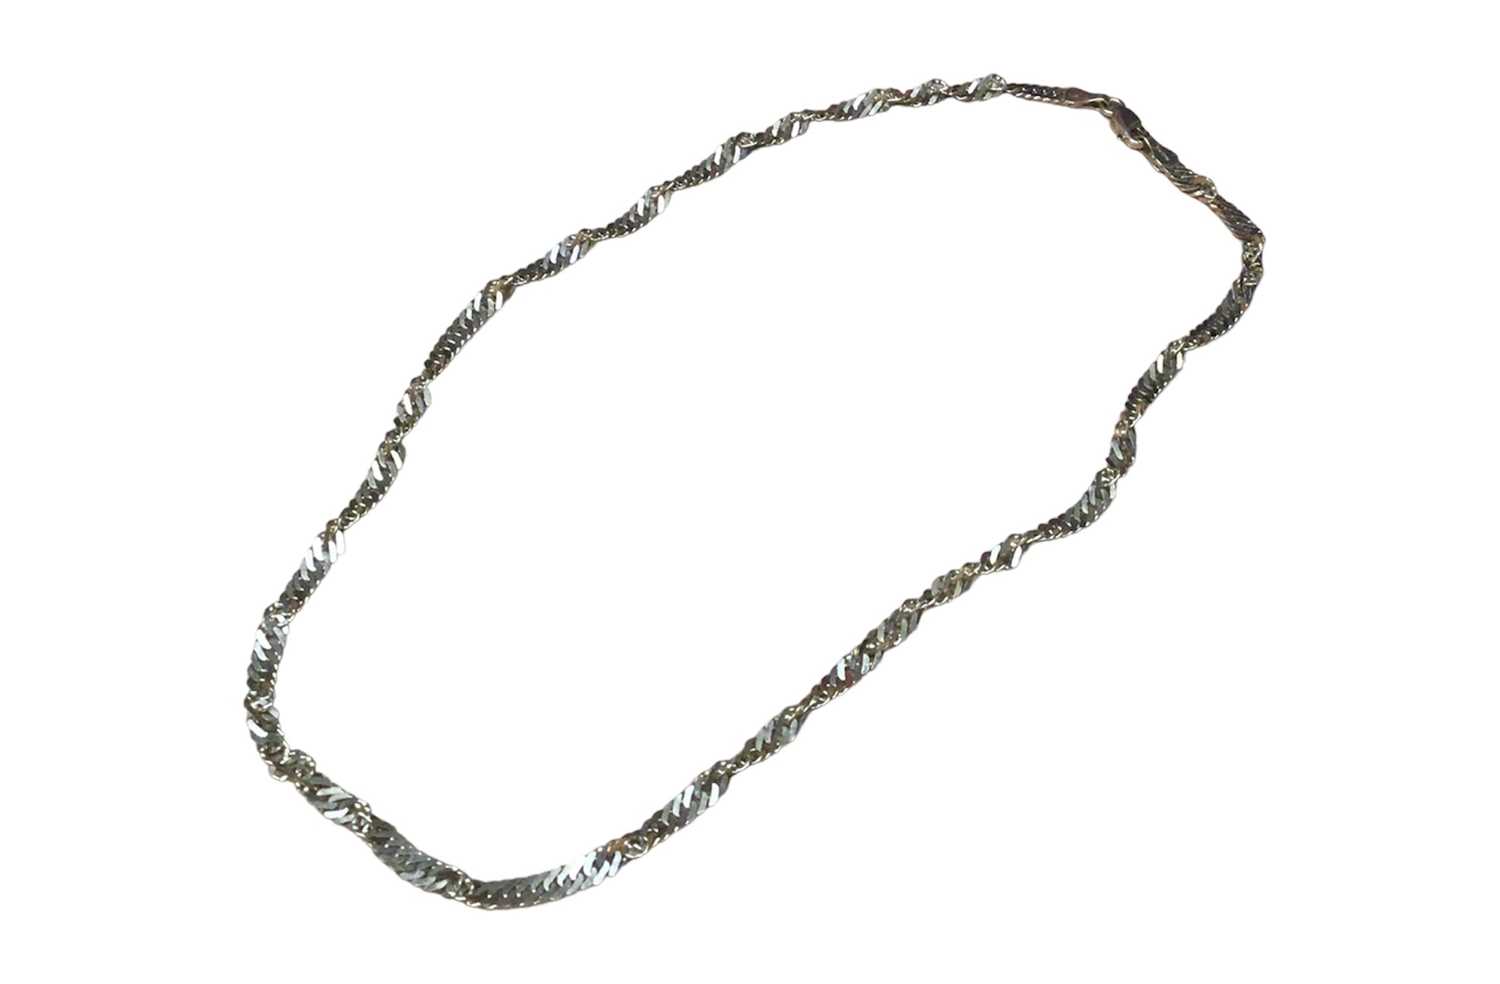 Lot 7 - 14ct gold flat curb link twisted chain necklace, 45.5cm long